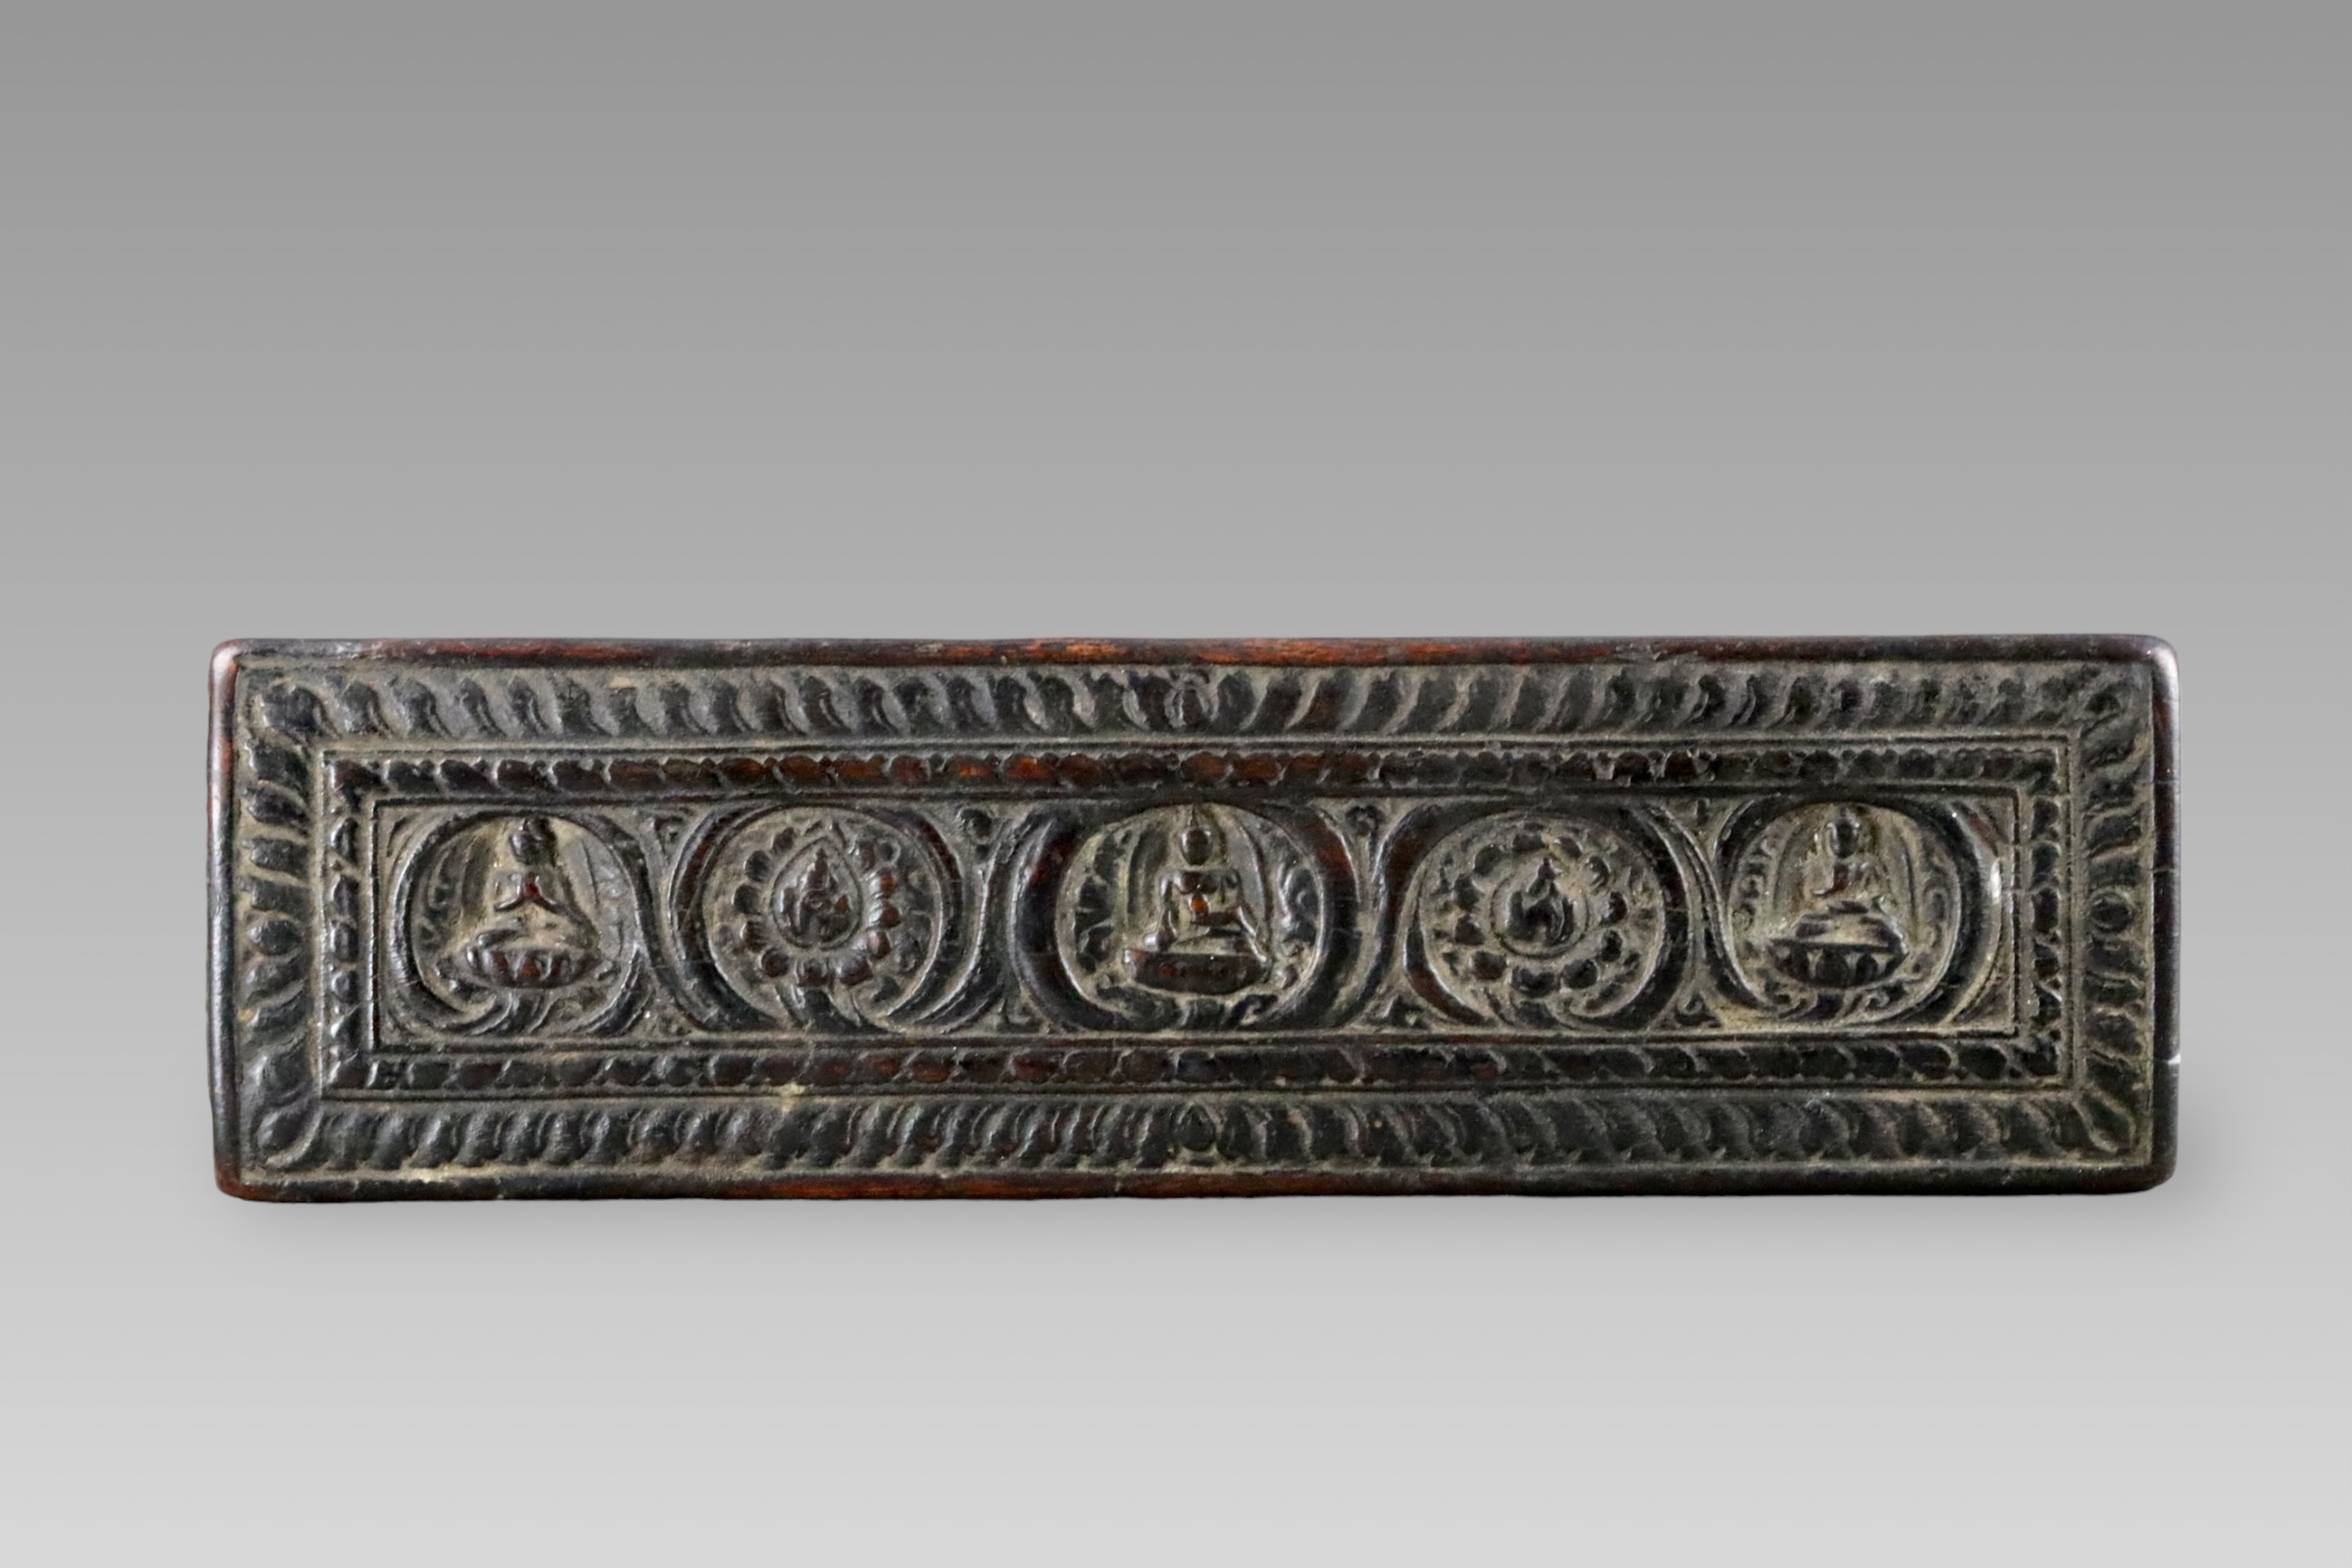 A Blackwood Book Cover carved with Buddhas, 15th century